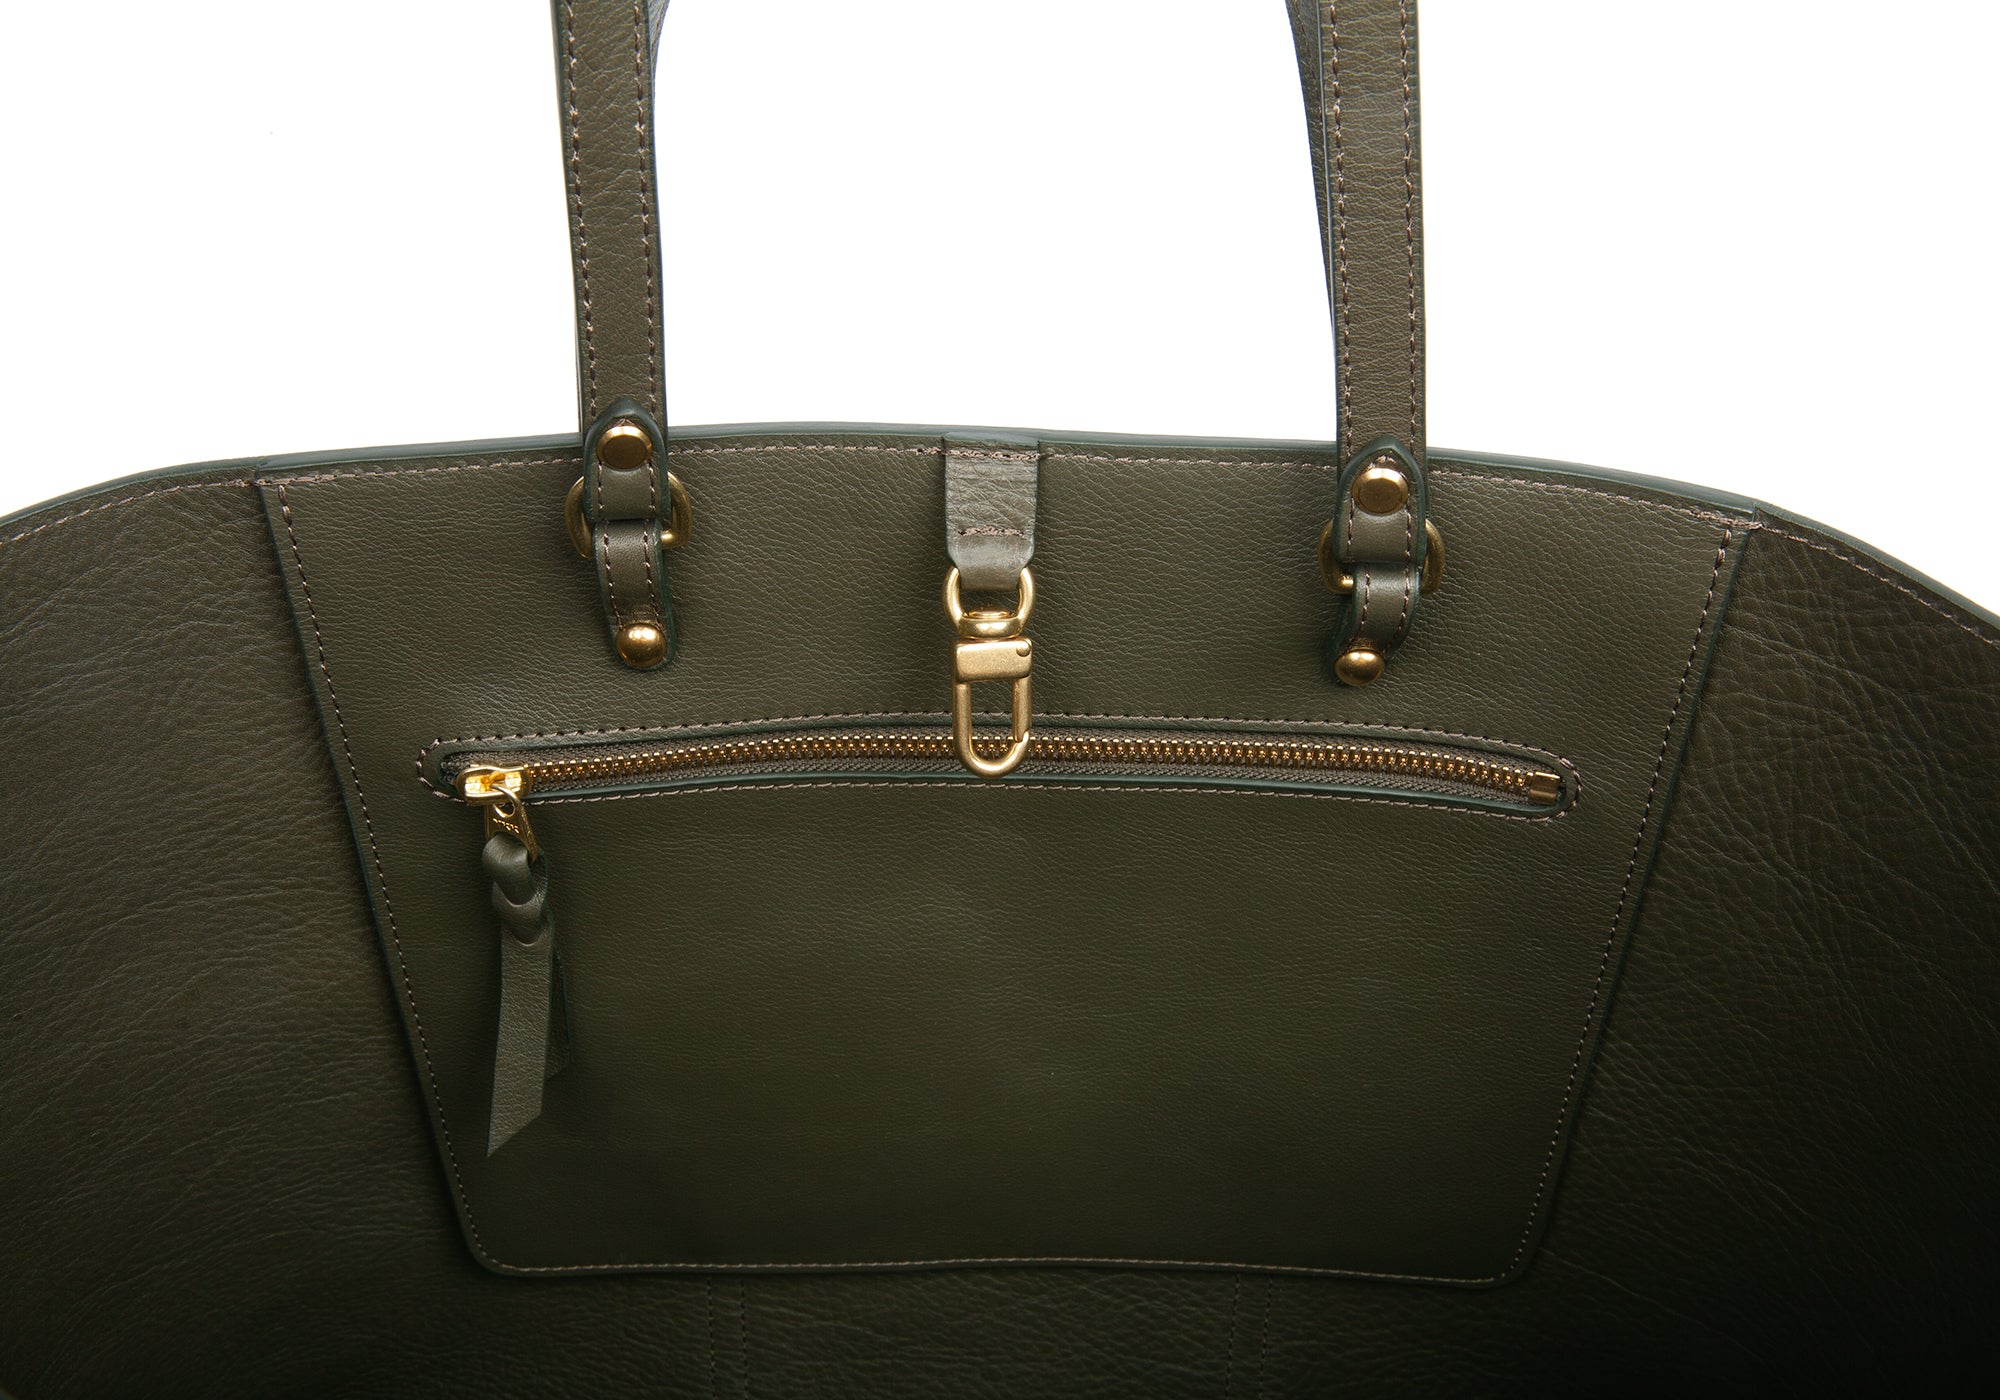 The Morris Leather Tote Olive